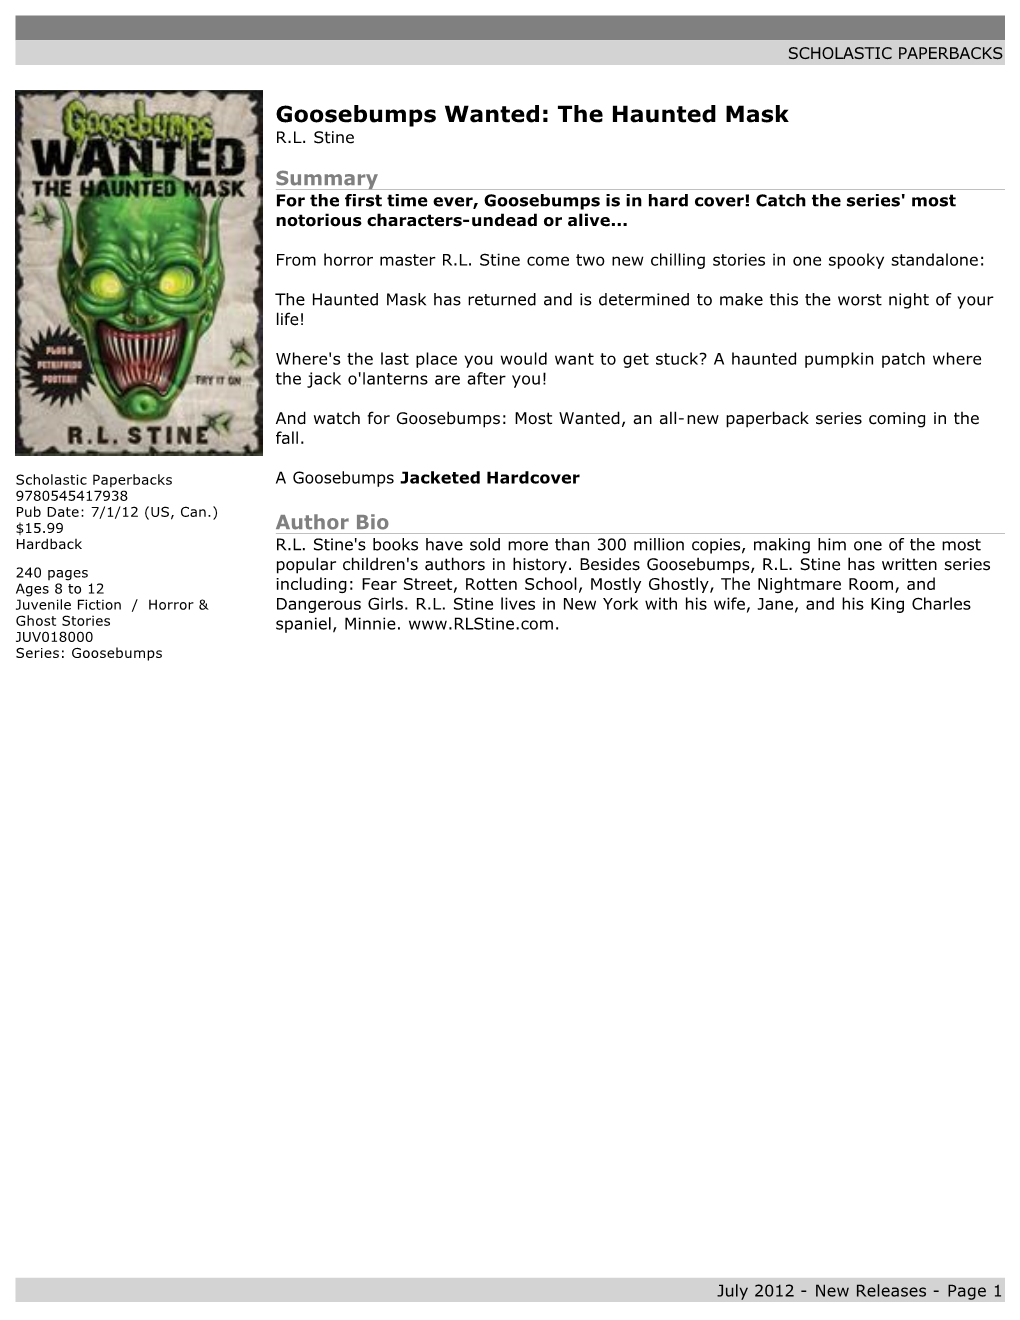 Goosebumps Wanted: the Haunted Mask R.L